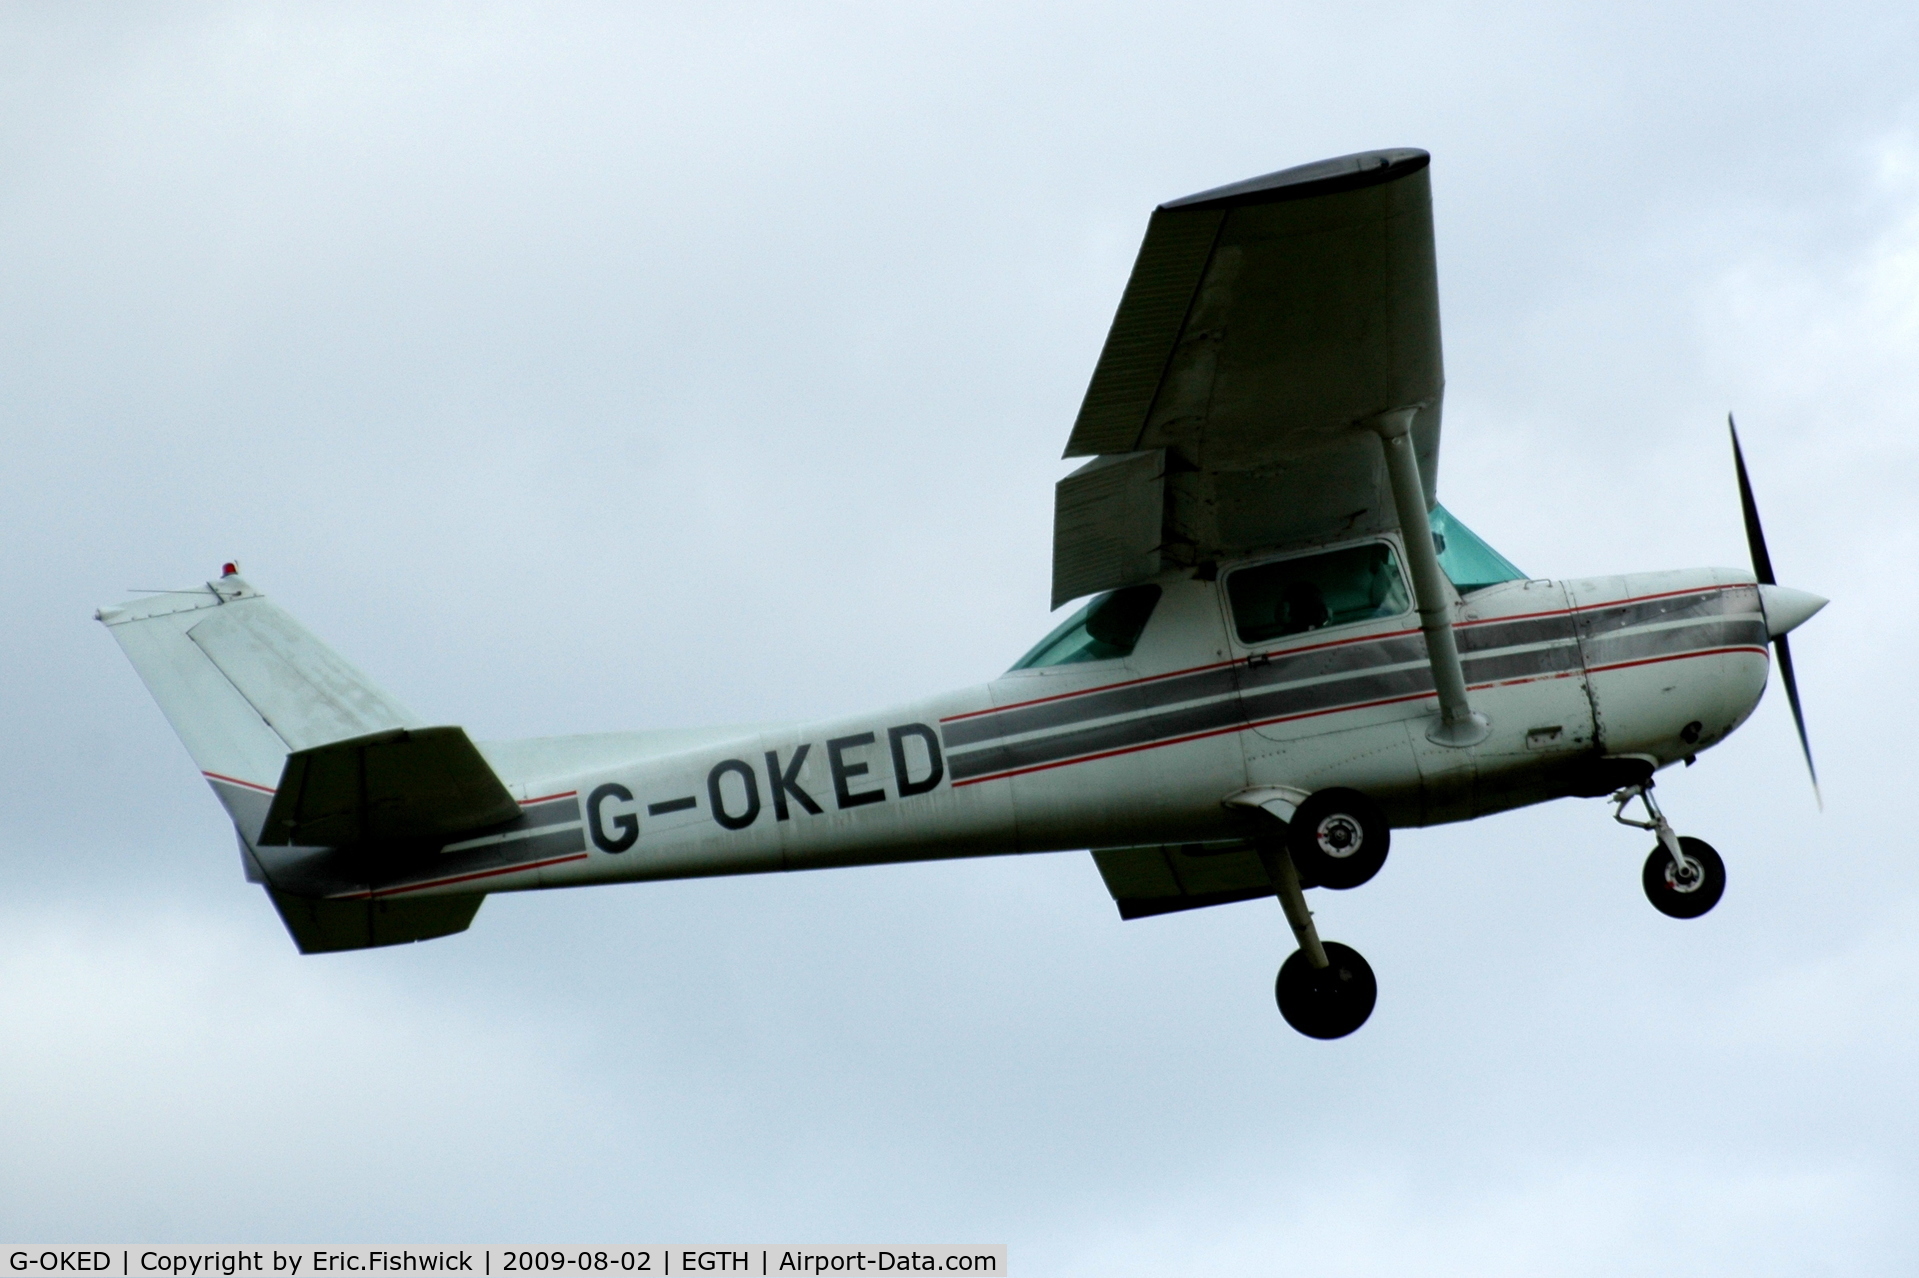 G-OKED, 1973 Cessna 150L C/N 150-74250, G-OKED departing Shuttleworth Military Pagent Air Display Aug 09